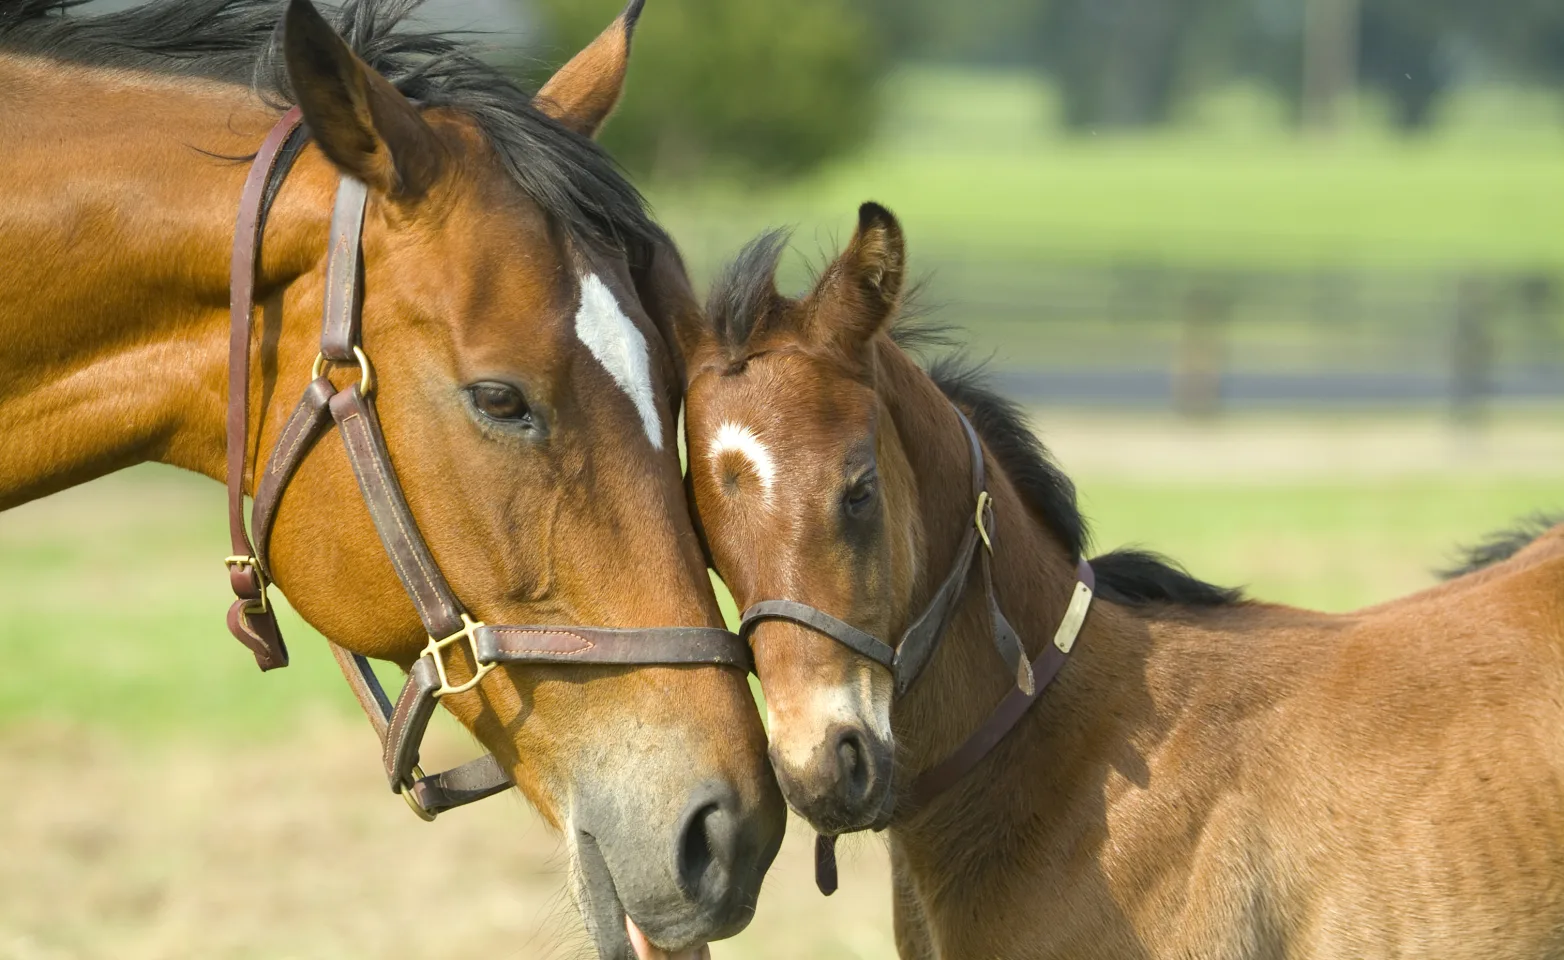 A horse and foal touch heads